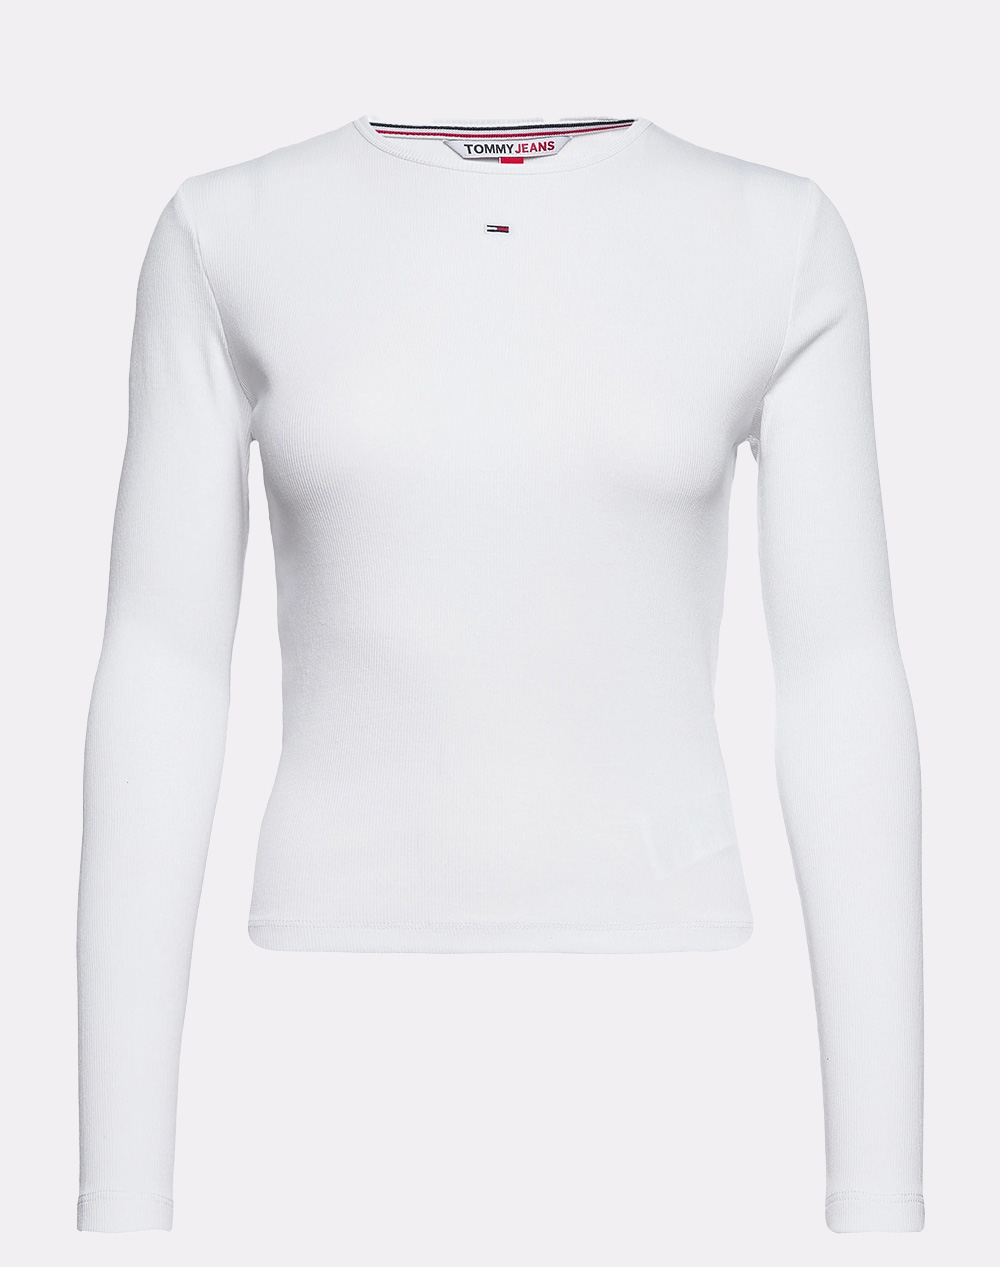 RIB C-NECK LONG-SLEEVED White TJW TOMMY - BABY JERSEY TEE JEANS